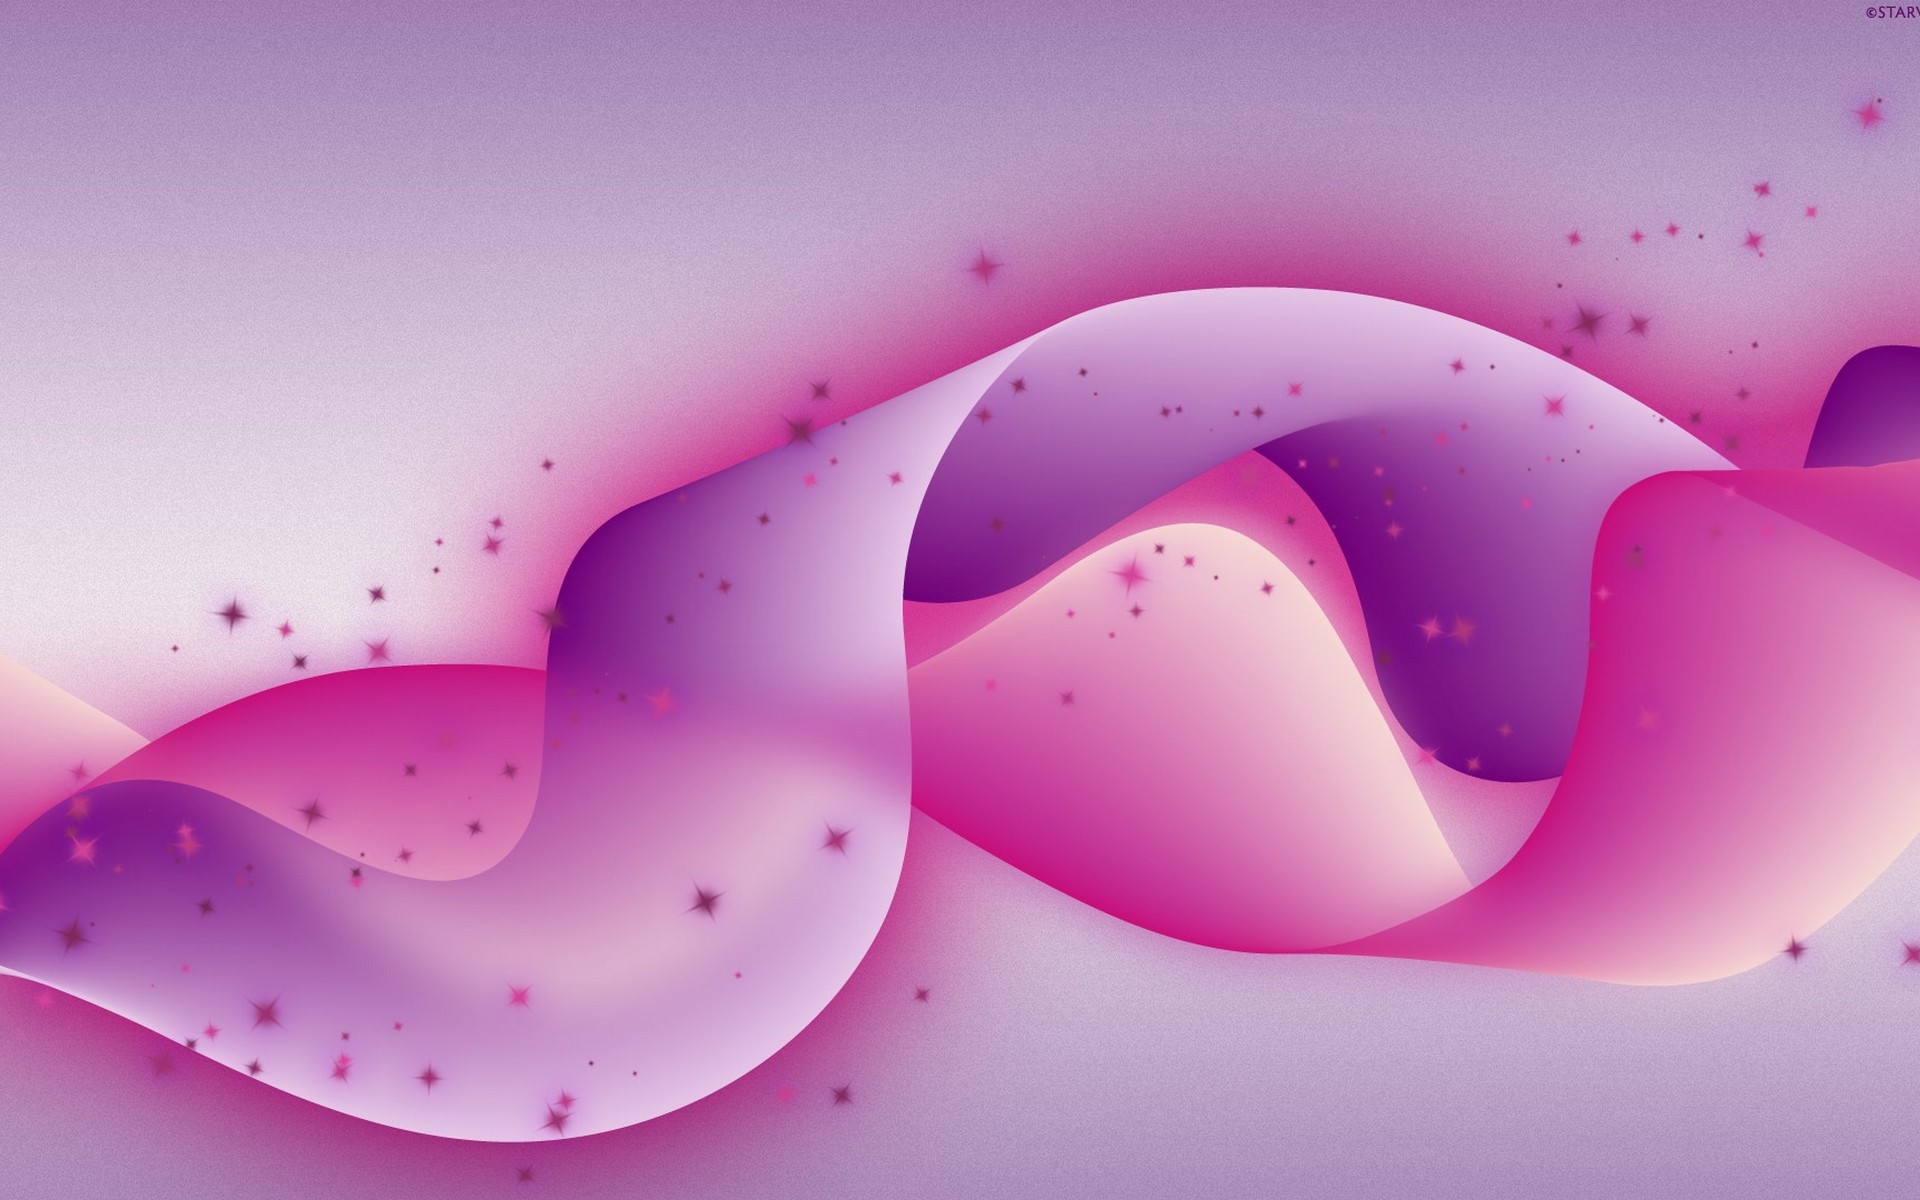 General 1920x1200 digital art shapes abstract pink purple pink background gradient